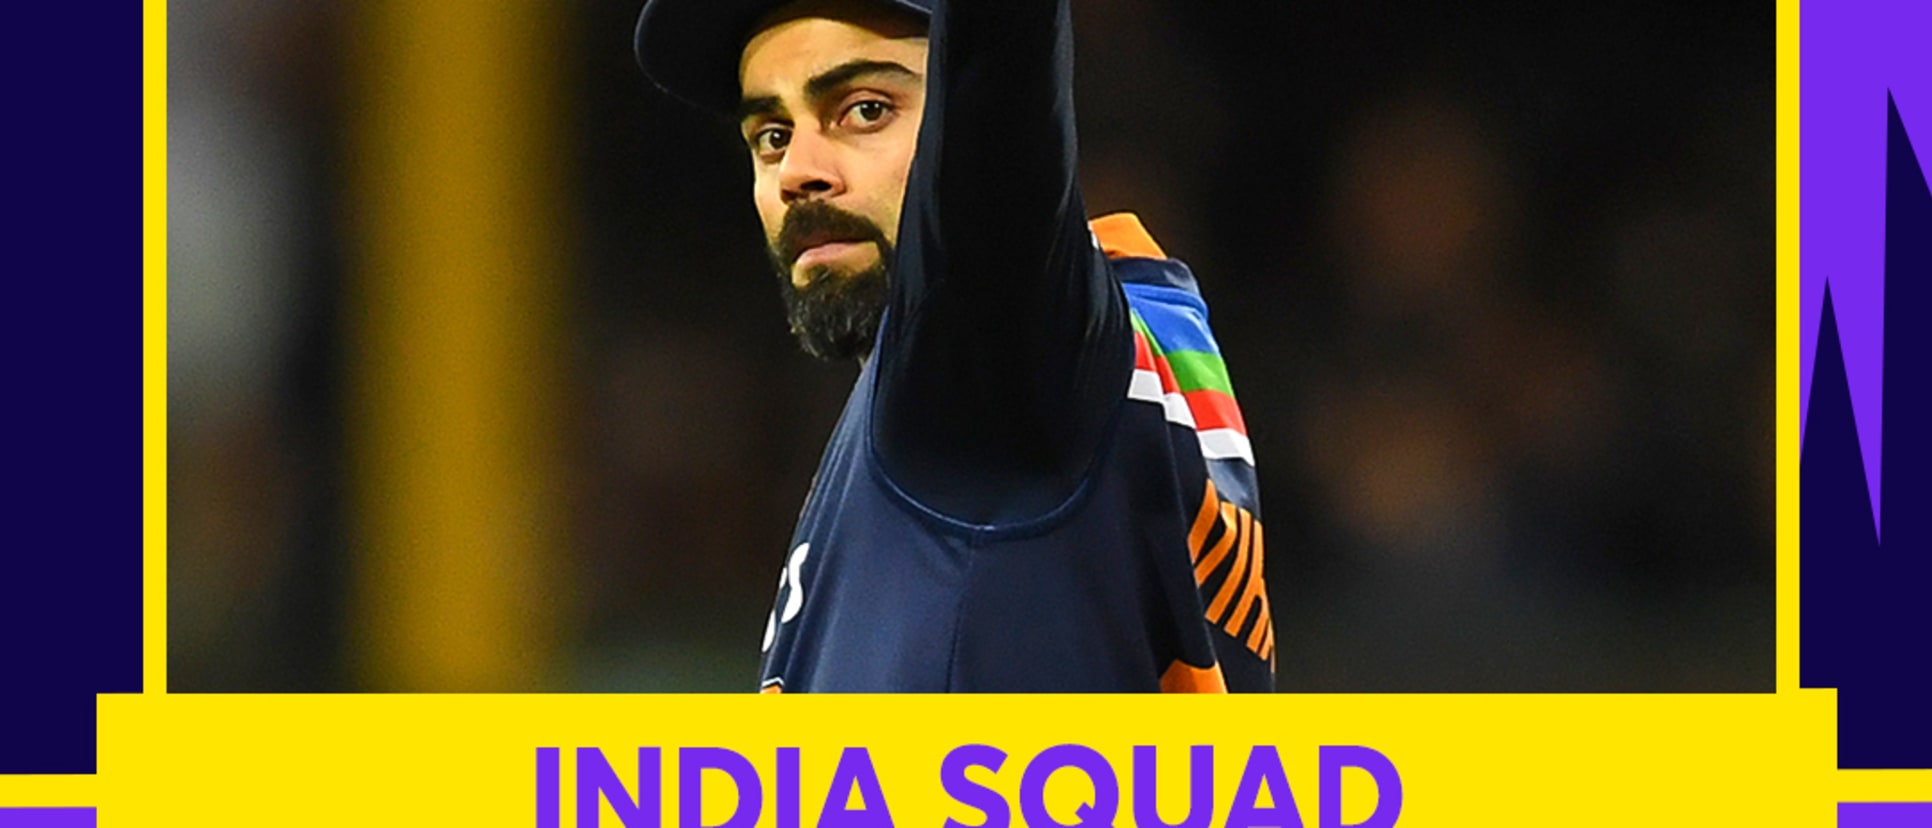 India – Men's T20 World Cup 2021 squad